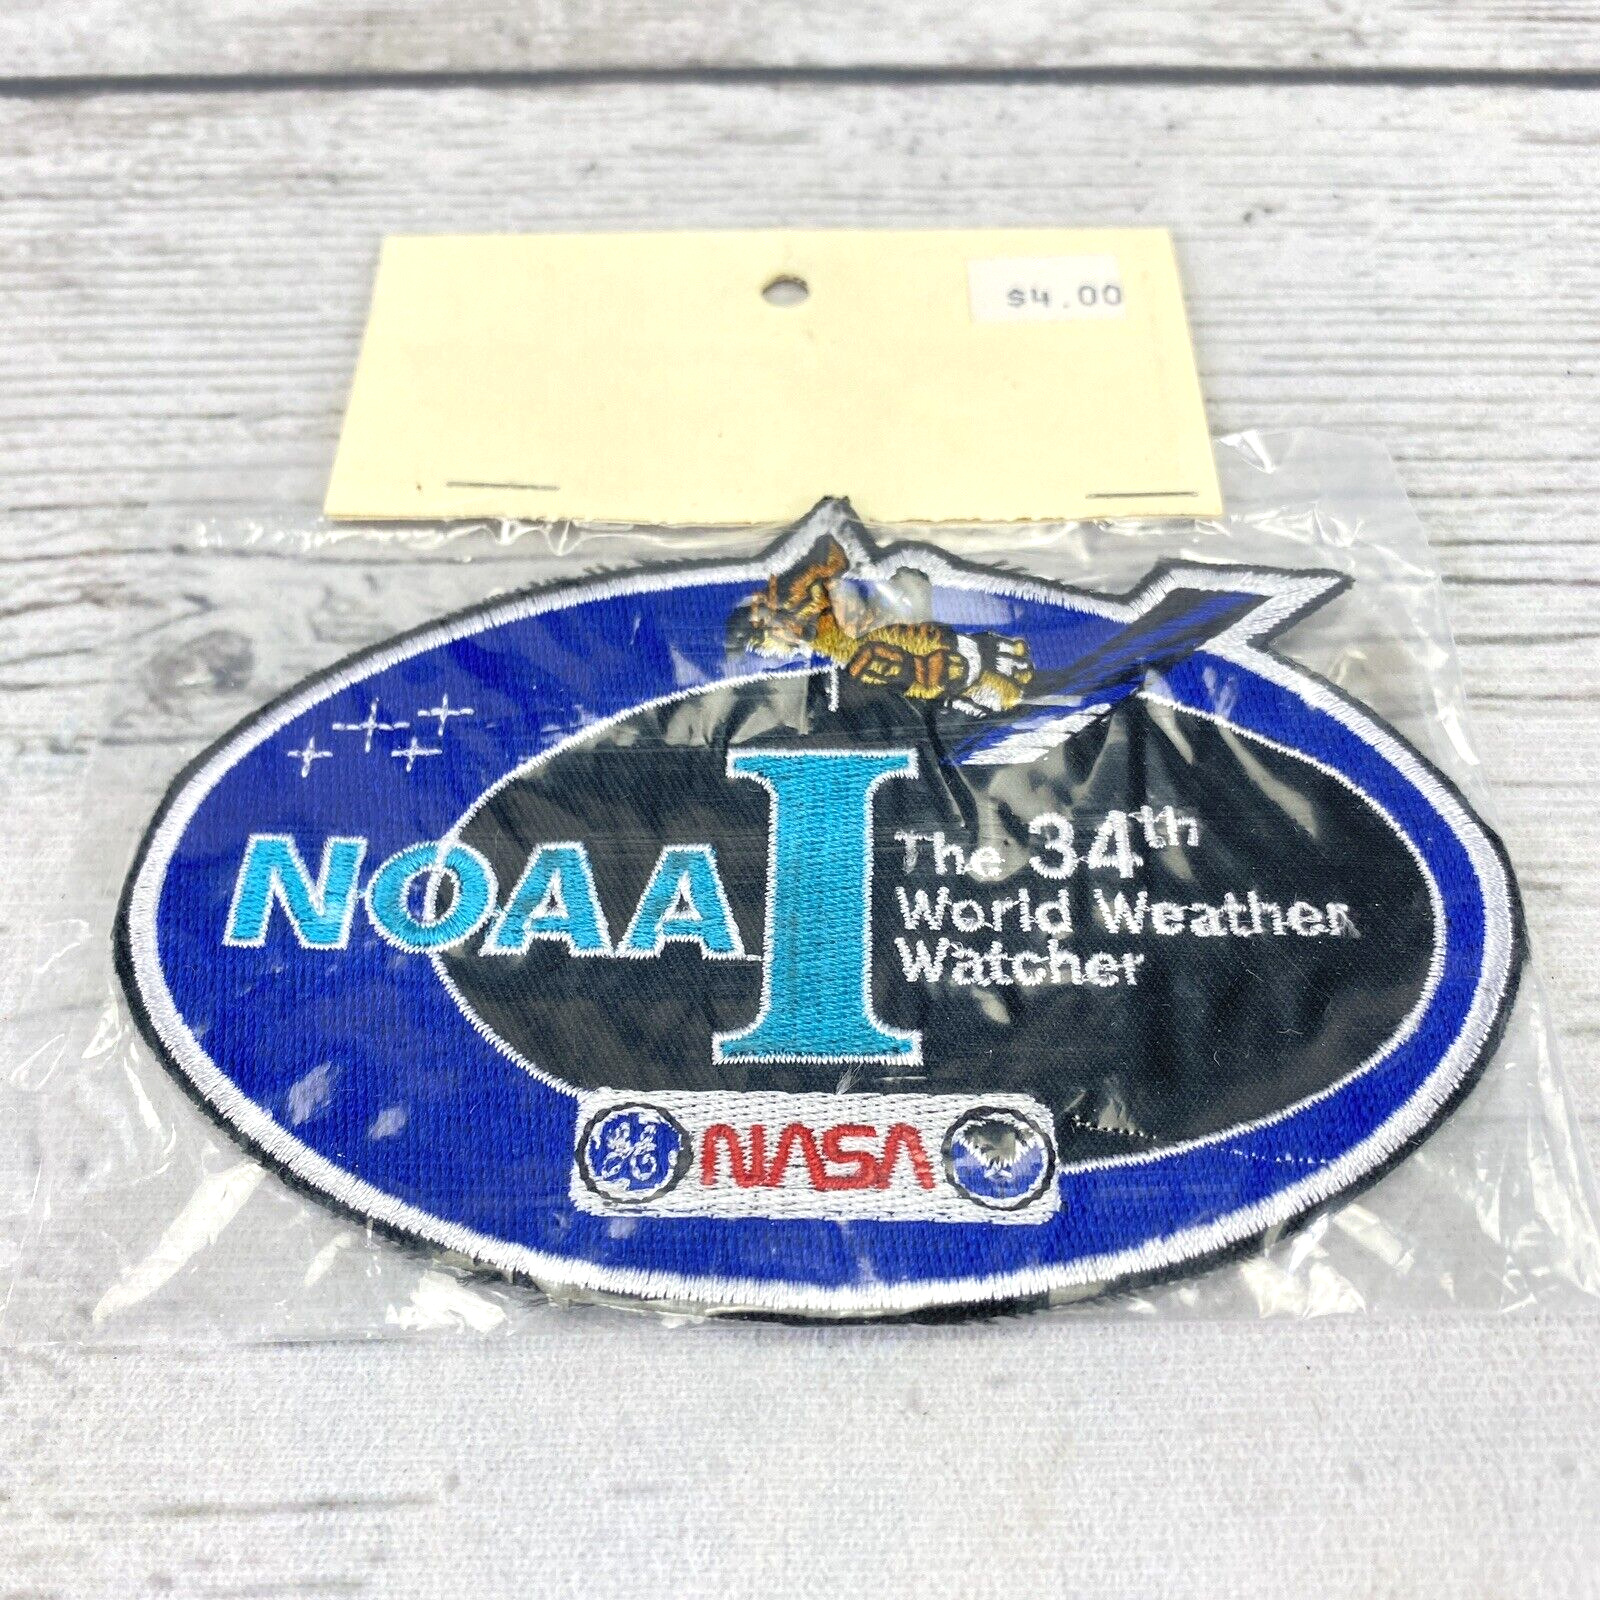 Rare NASA NOAA I The 34th World Weather Watcher PATCH Approx. 5 x 3.5 Inches New